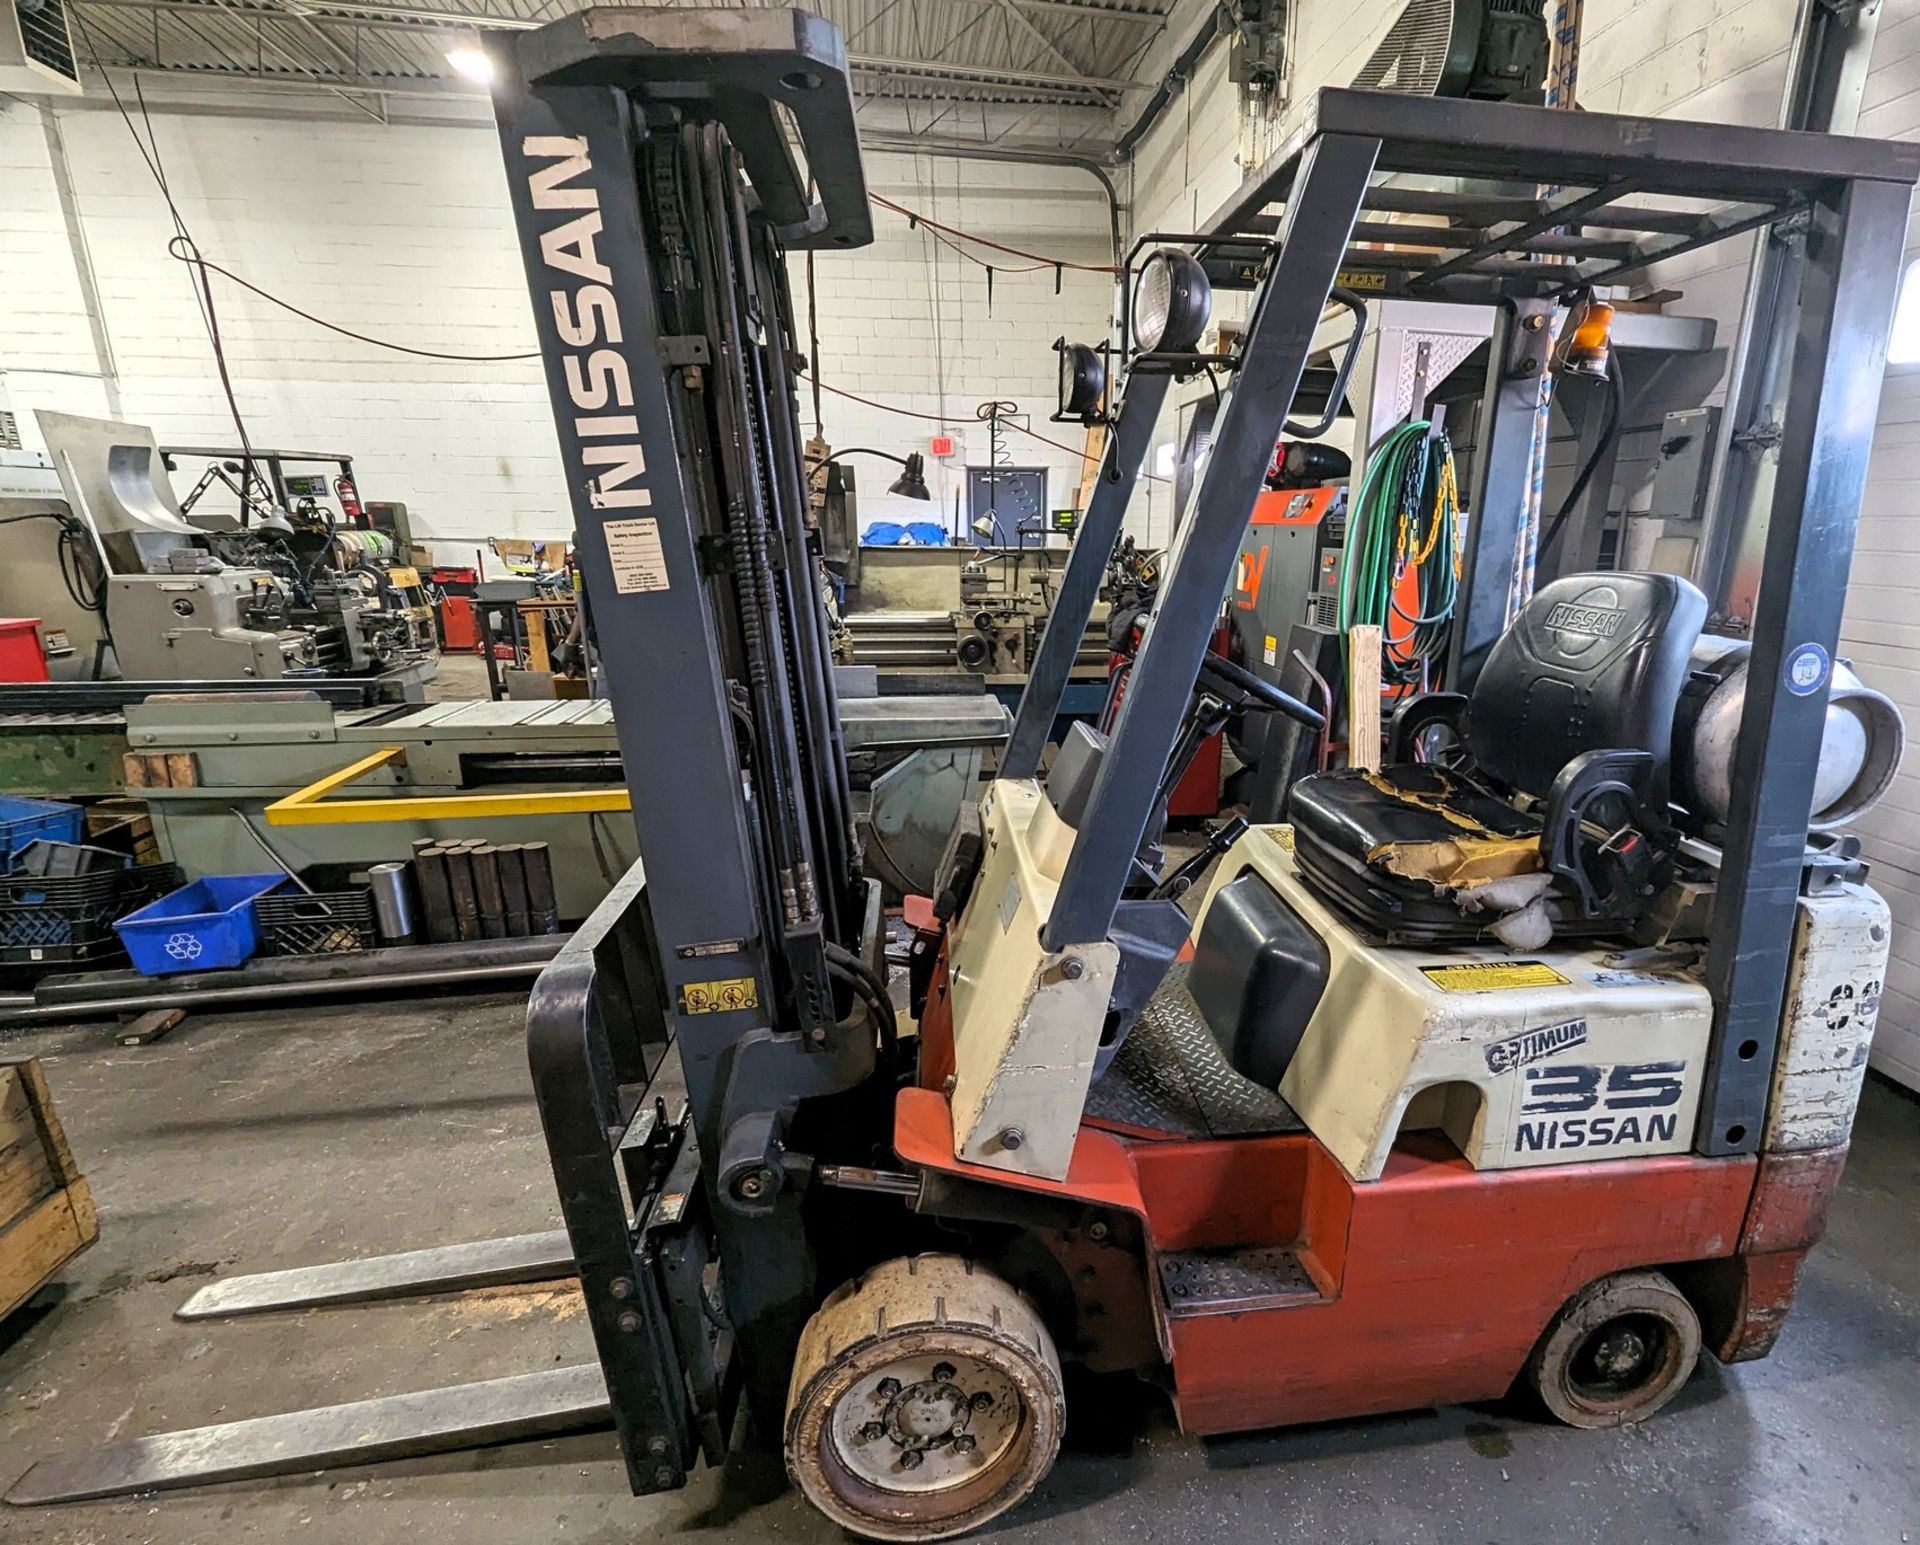 NISSAN CPJ01A18PV PROPANE FORKLIFT, 2,950LB CAP., 187” MAX LIFT, 3-STAGE MAST, SIDE SHIFT, APPROX. - Image 3 of 6